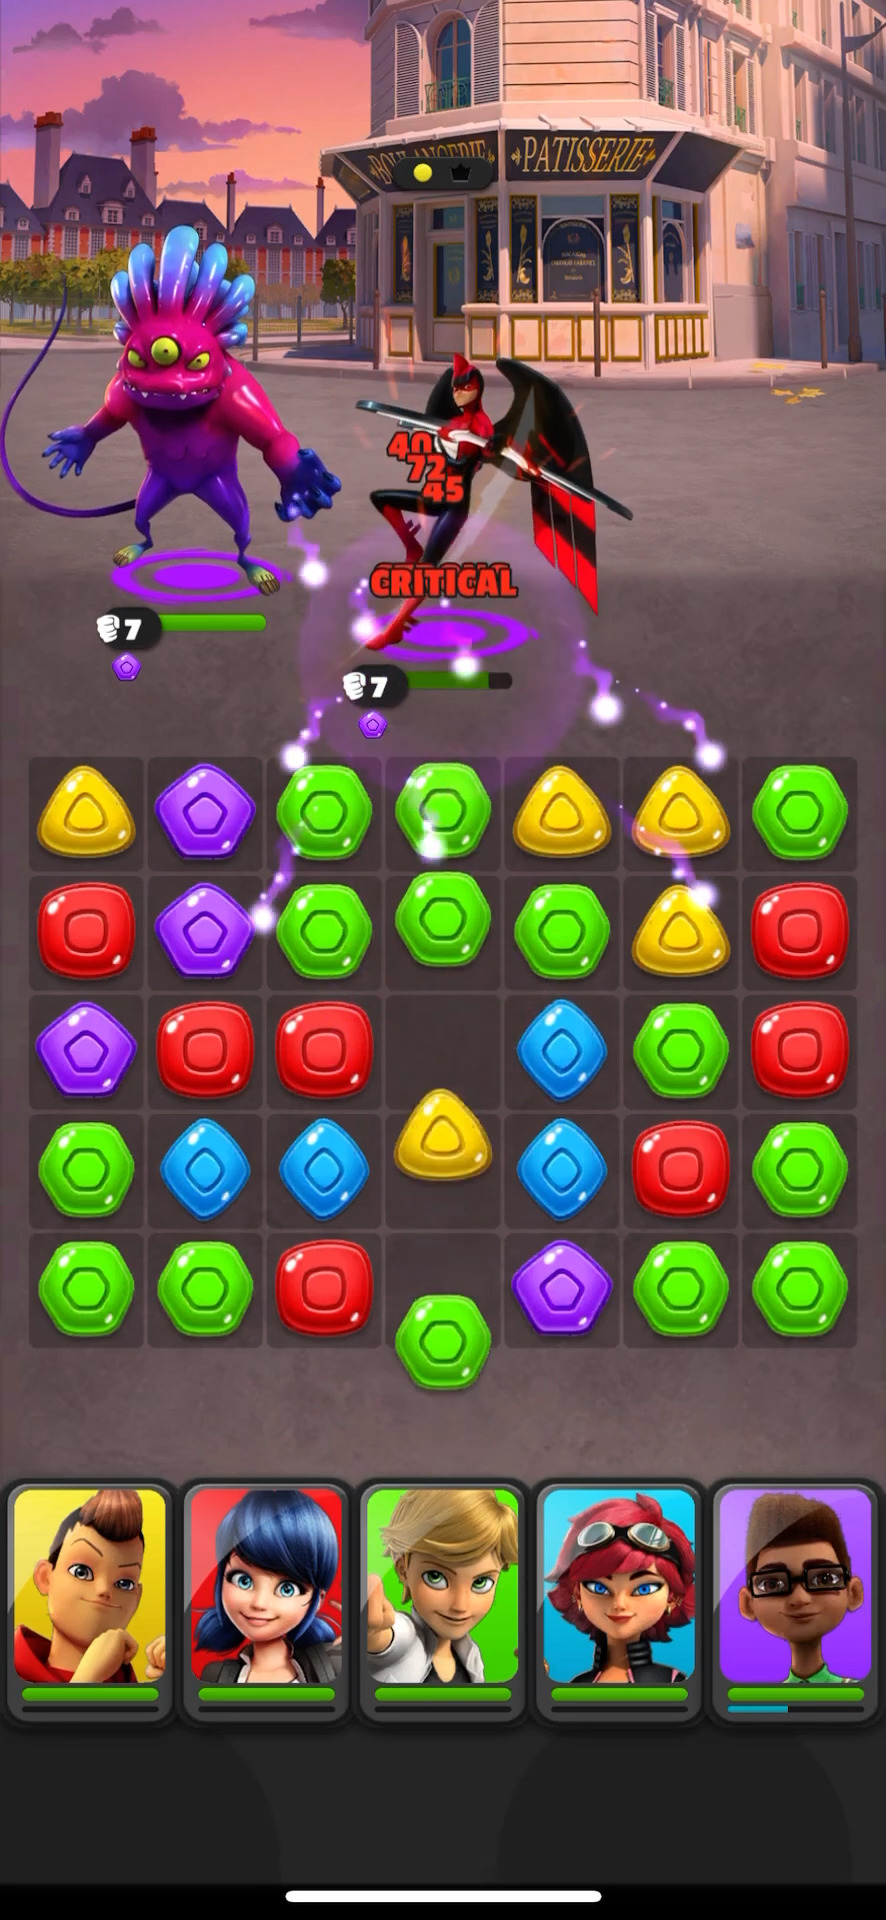 Miraculous Puzzle Hero Match 3 - Android game screenshots.